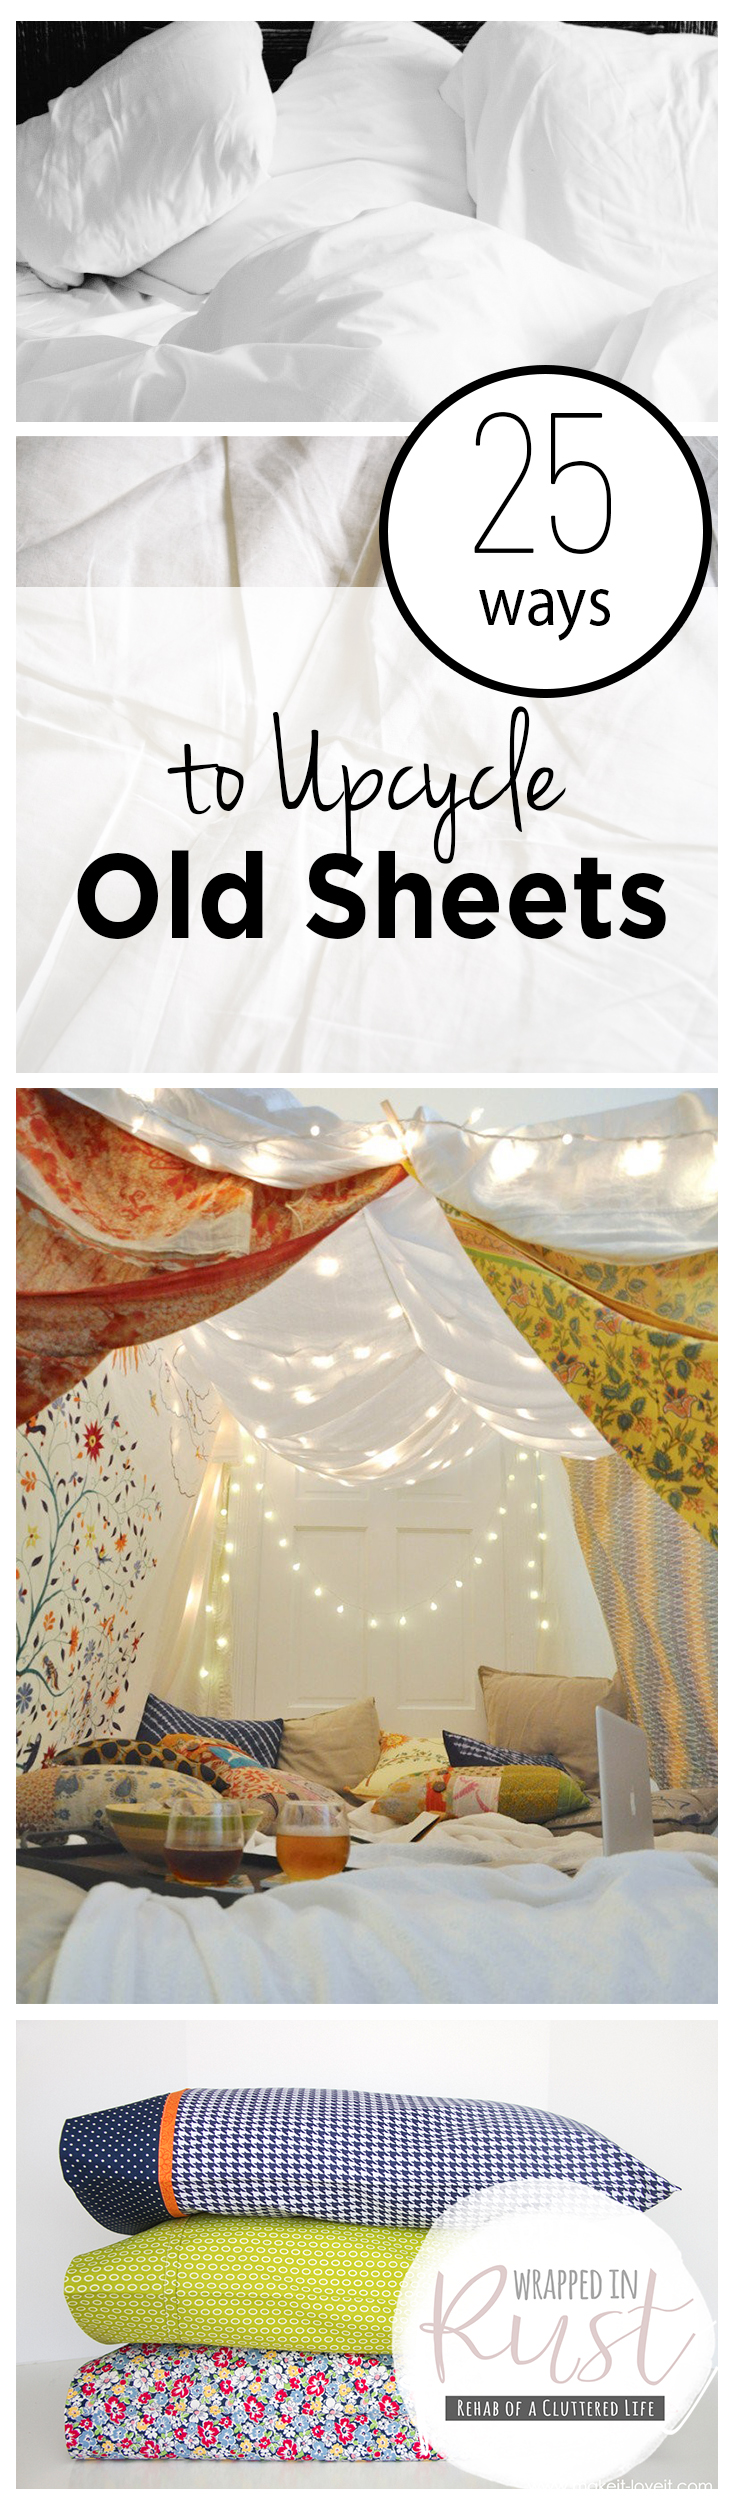 How to Reuse Old Sheets, How to Upcycle Old Sheets, Things to Do With Old Sheets, Repurpose Projects, How to Repurpose Old Sheets, Life Hacks, Repurpose, Popular Pin